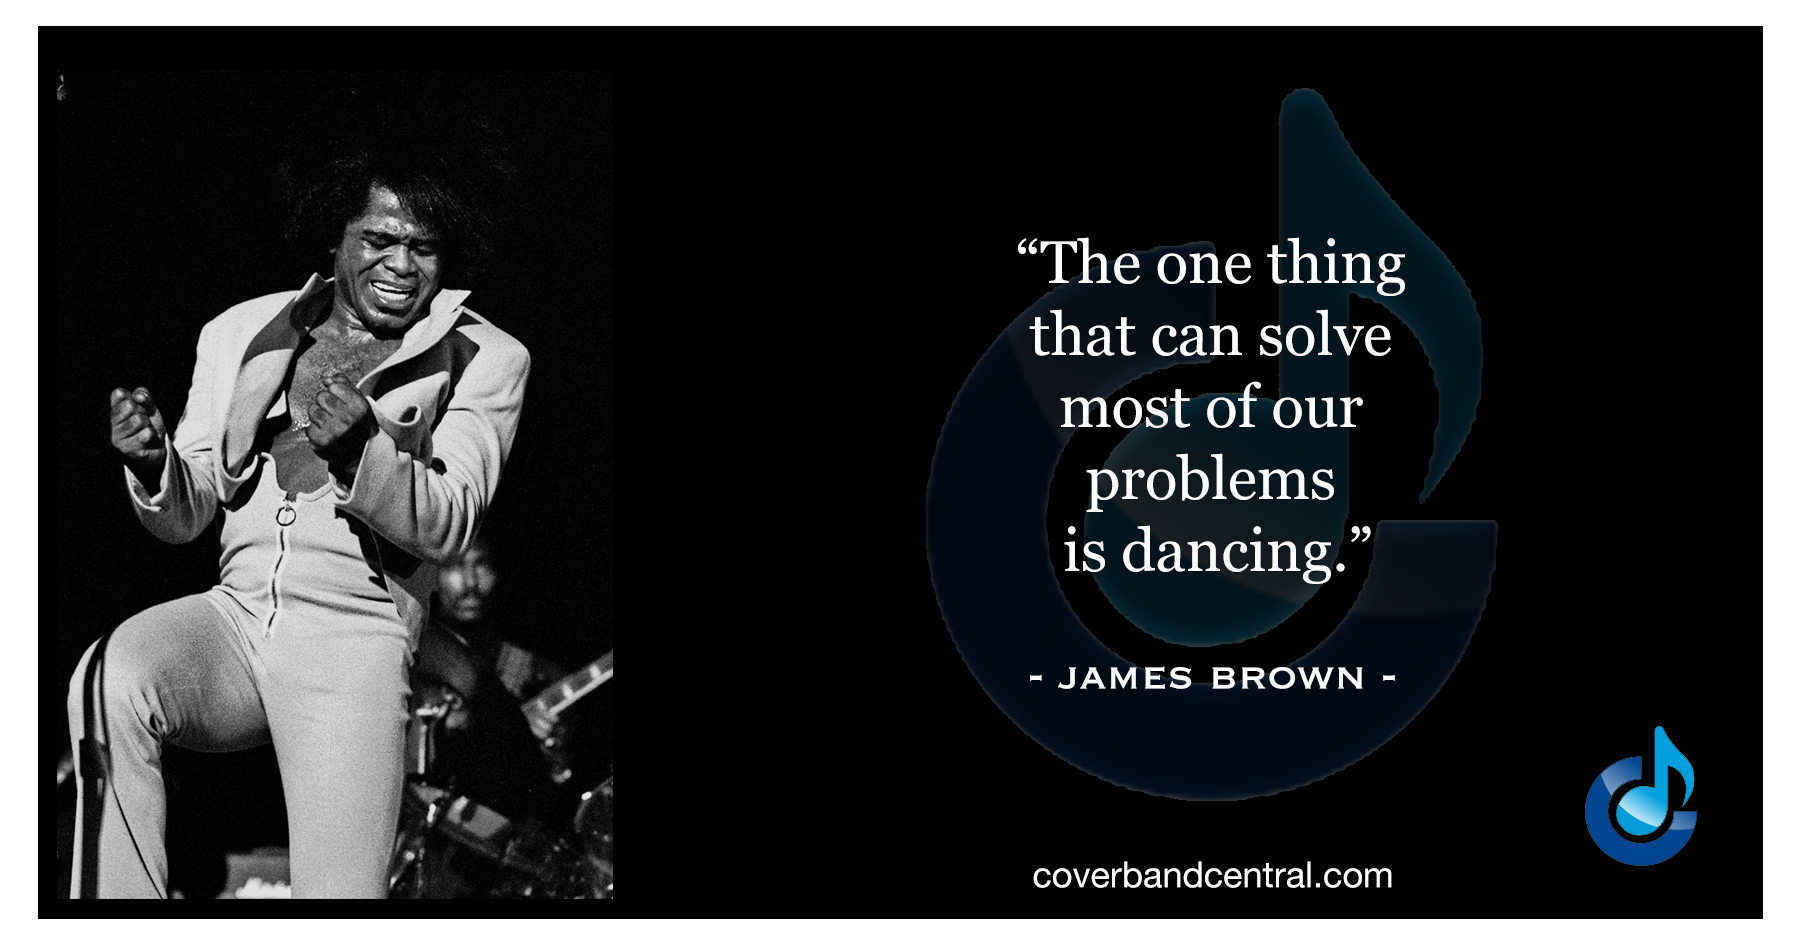 James Brown quote